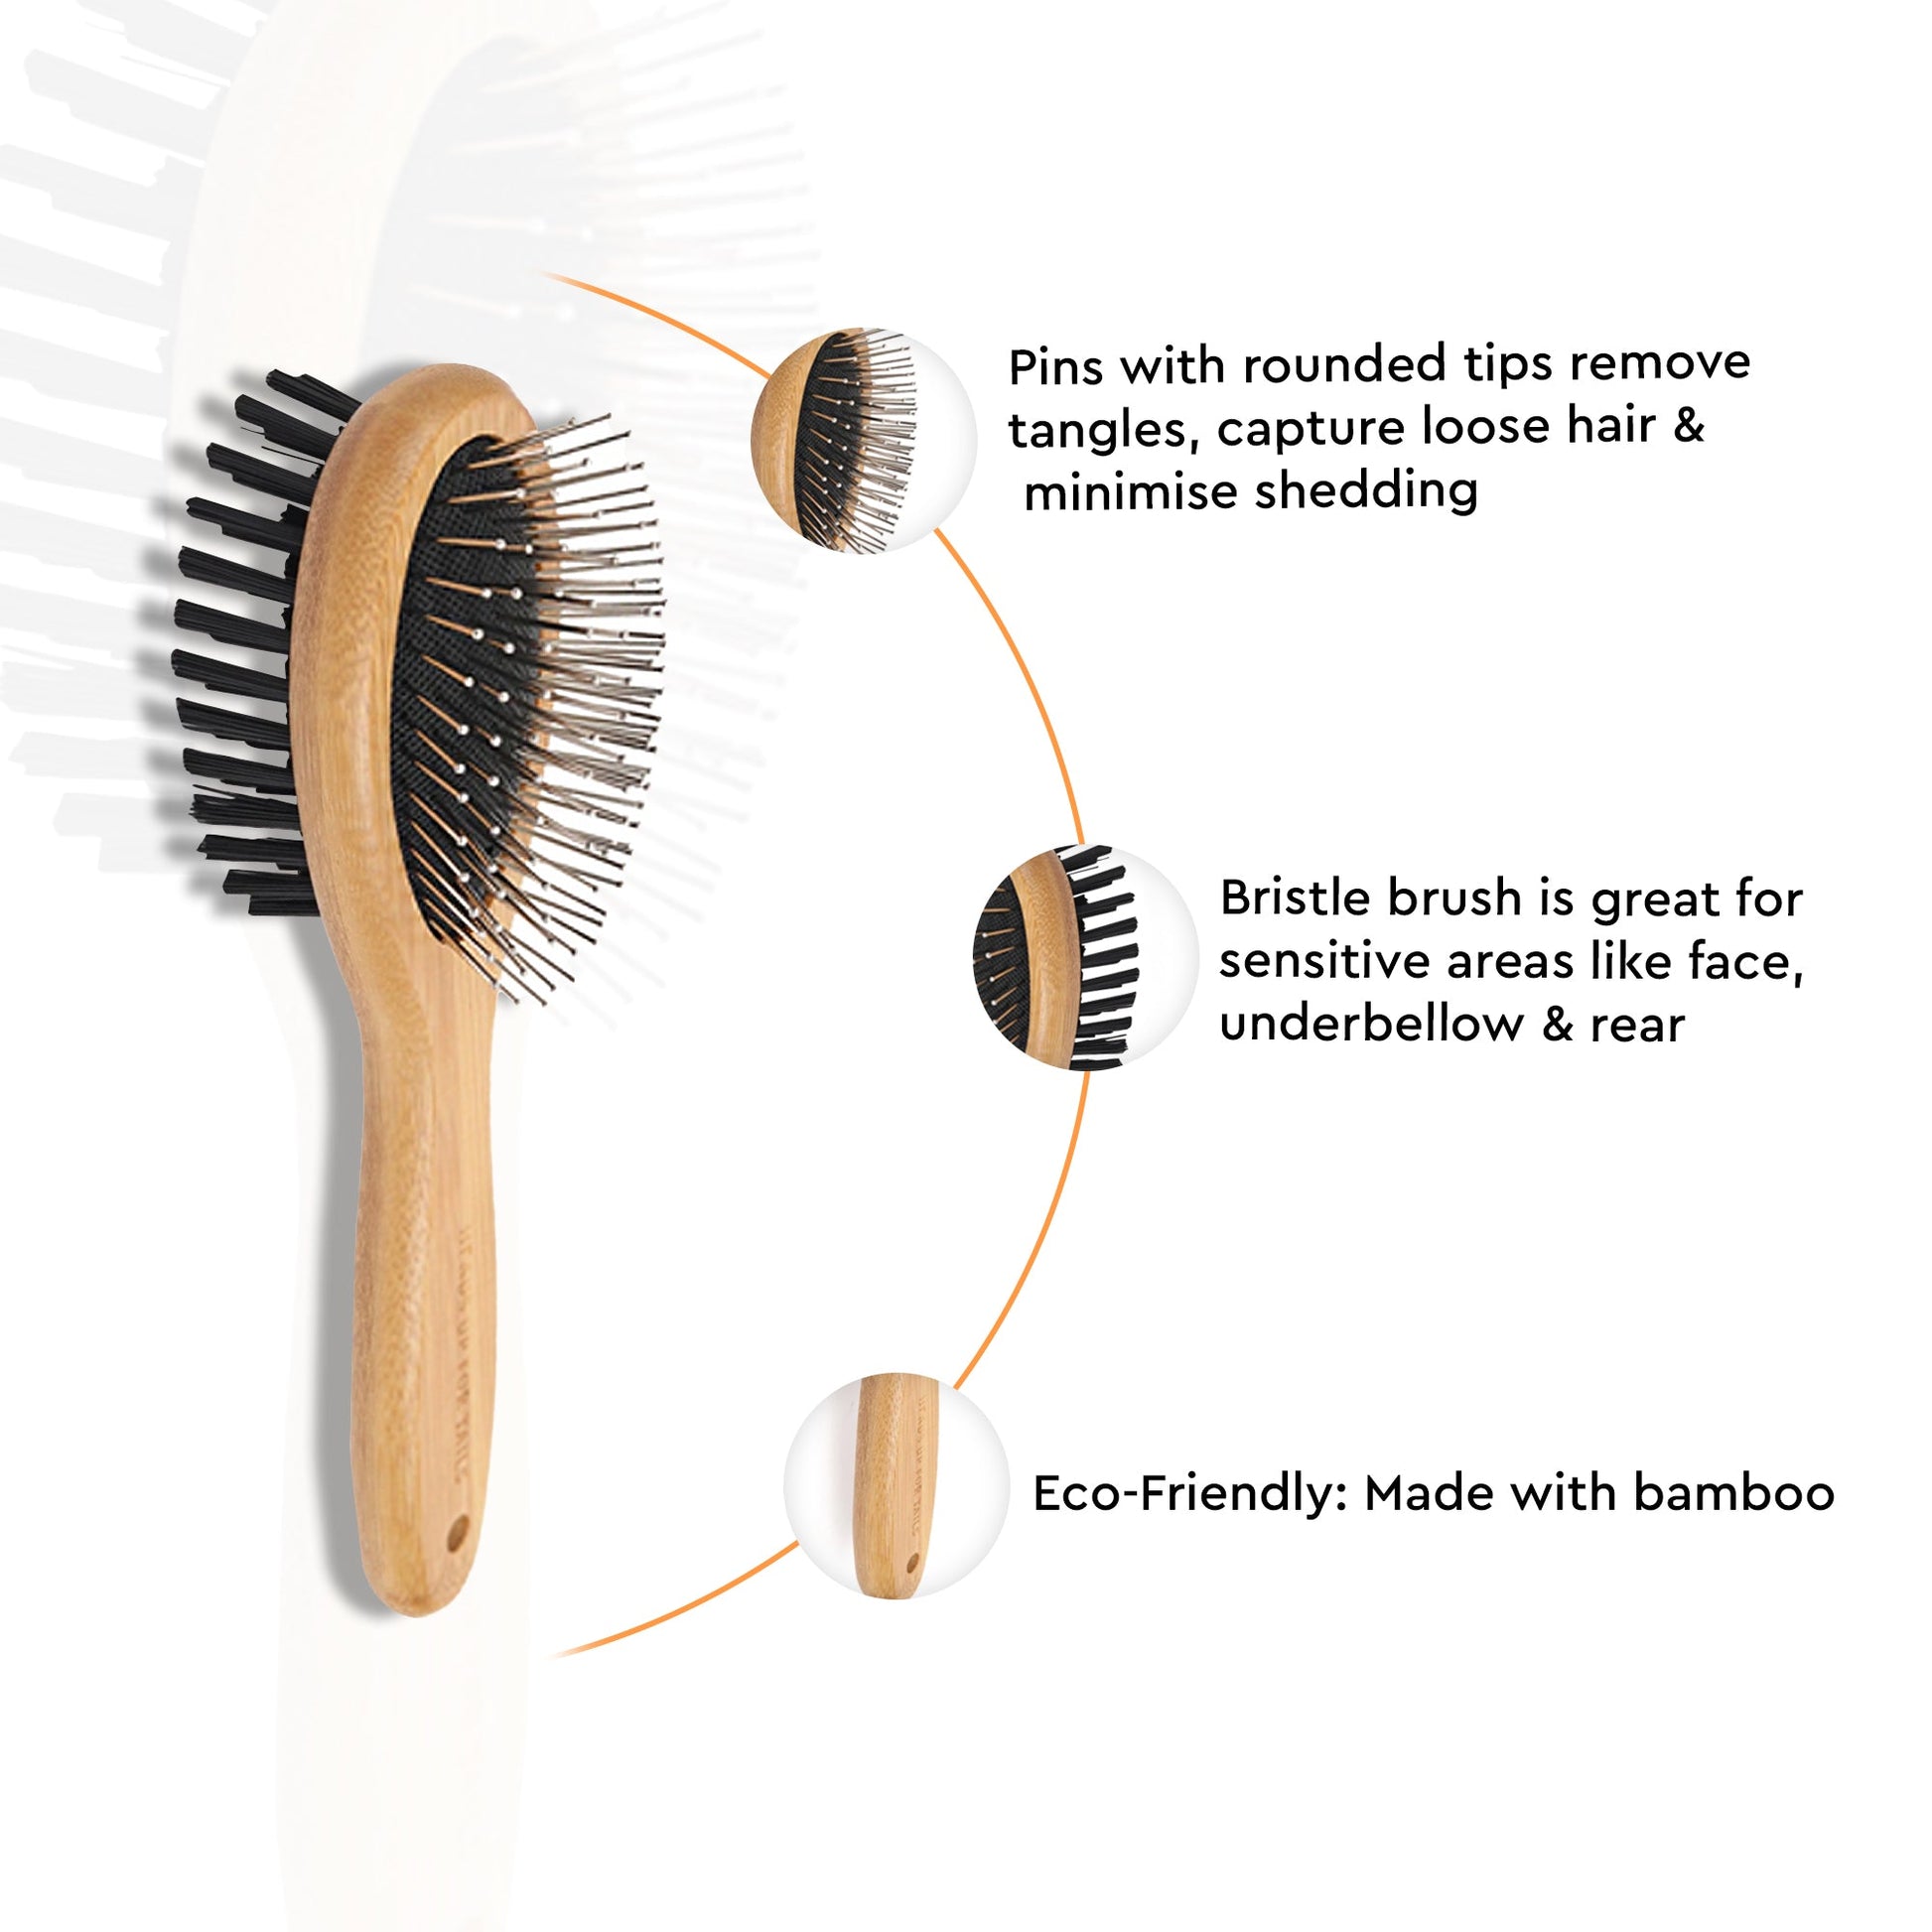 Paws For Earth Bamboo Double Sided Brush For Dogs - Heads Up For Tails